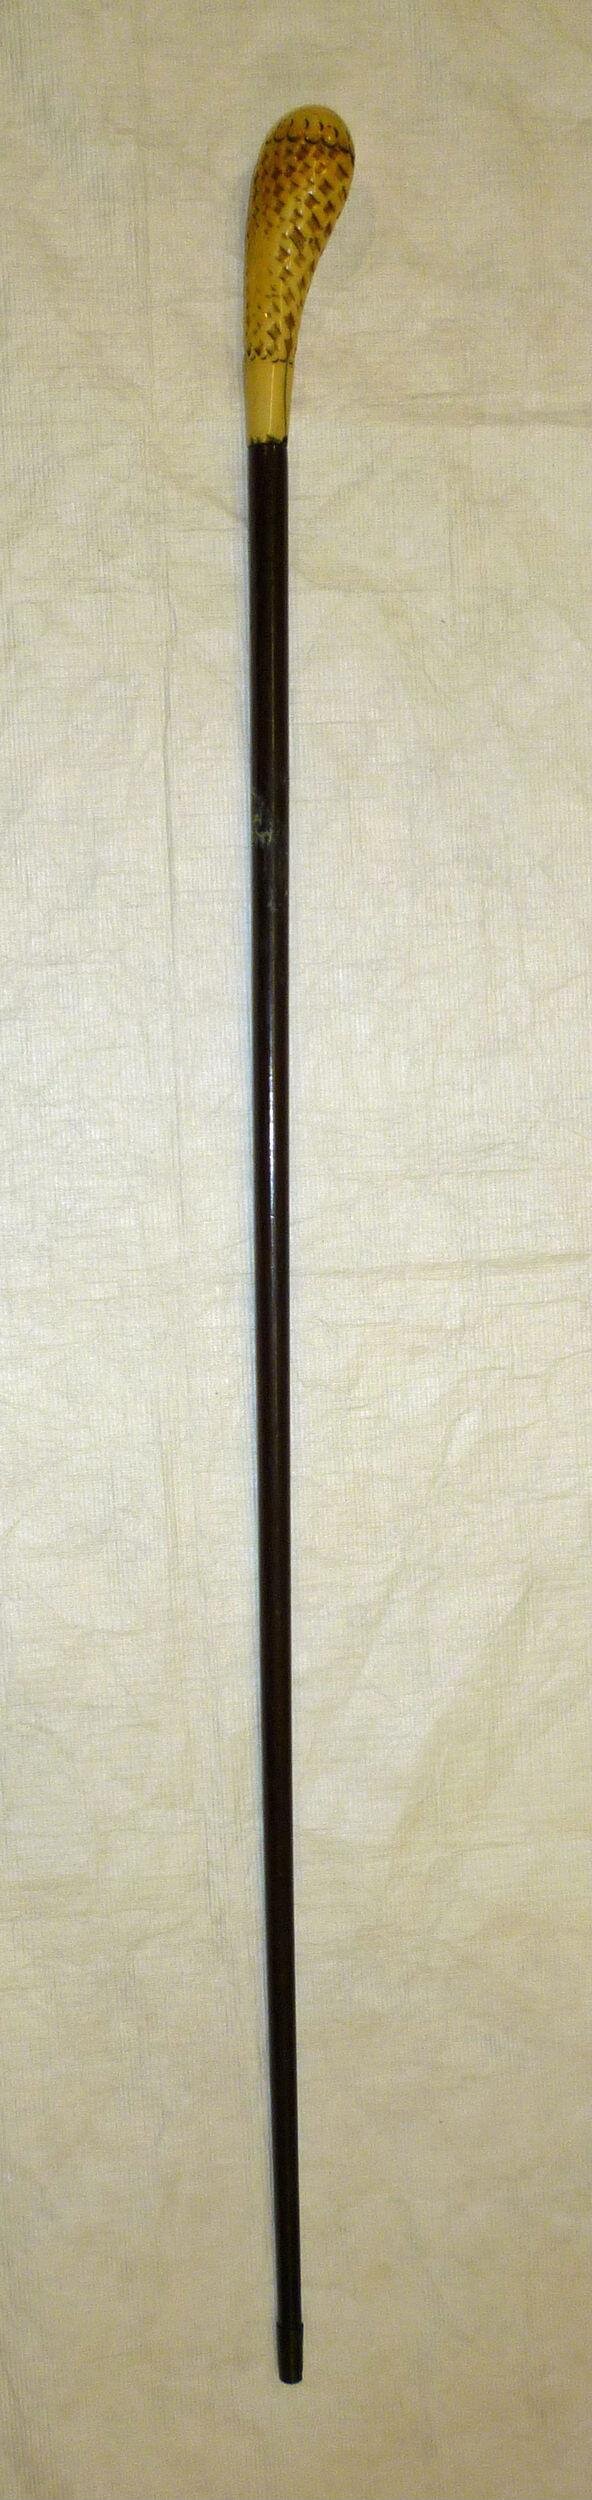 Swagger Stick top image